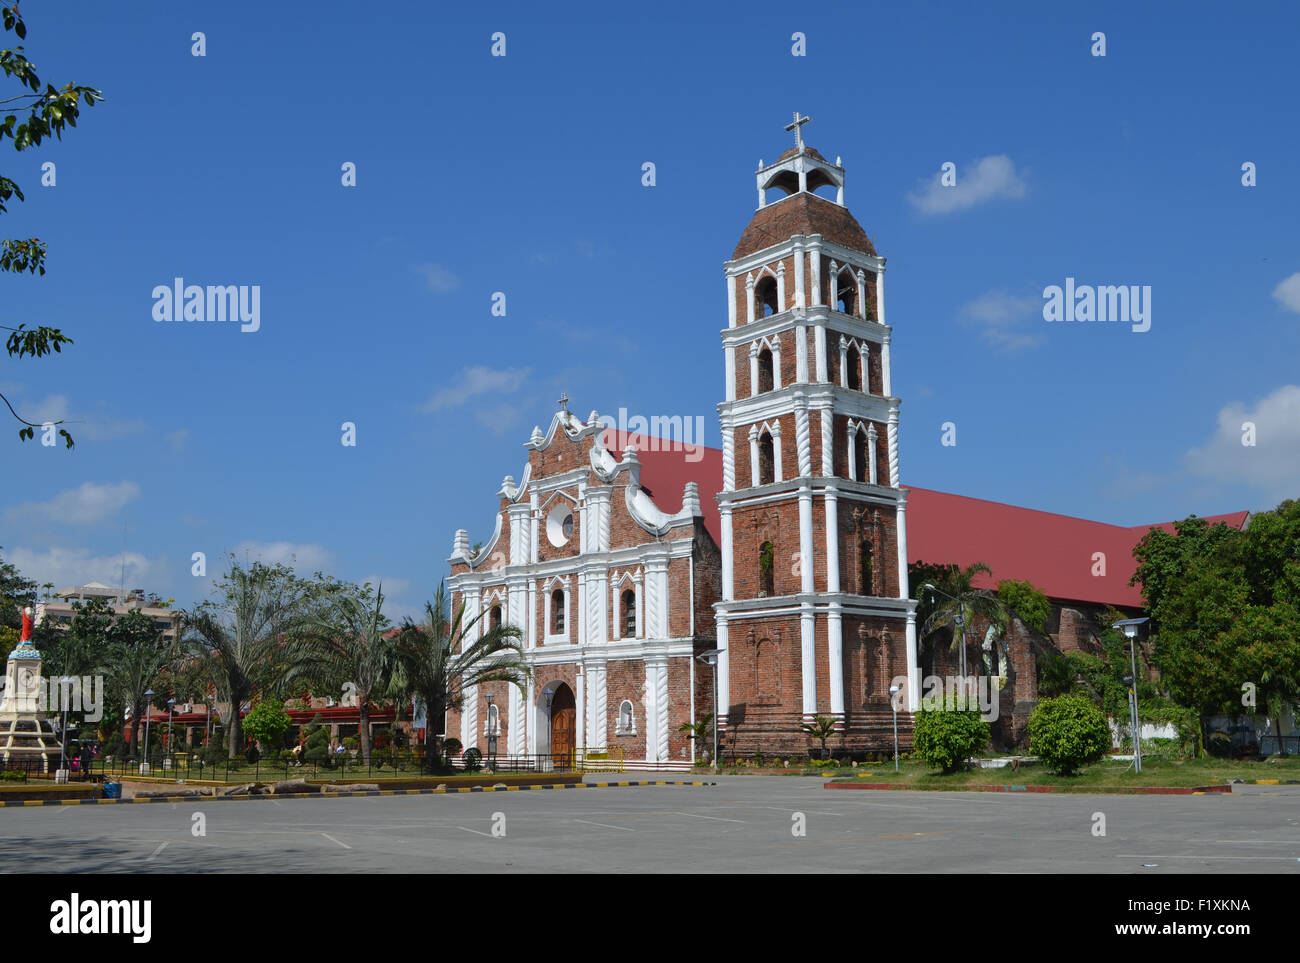 St.:Peters Metropolitan Cathedral, or Tuguegarao Cathedral, Cagayan, Philippines, Founded in 1604 by Dominican Friars. The curre Stock Photo